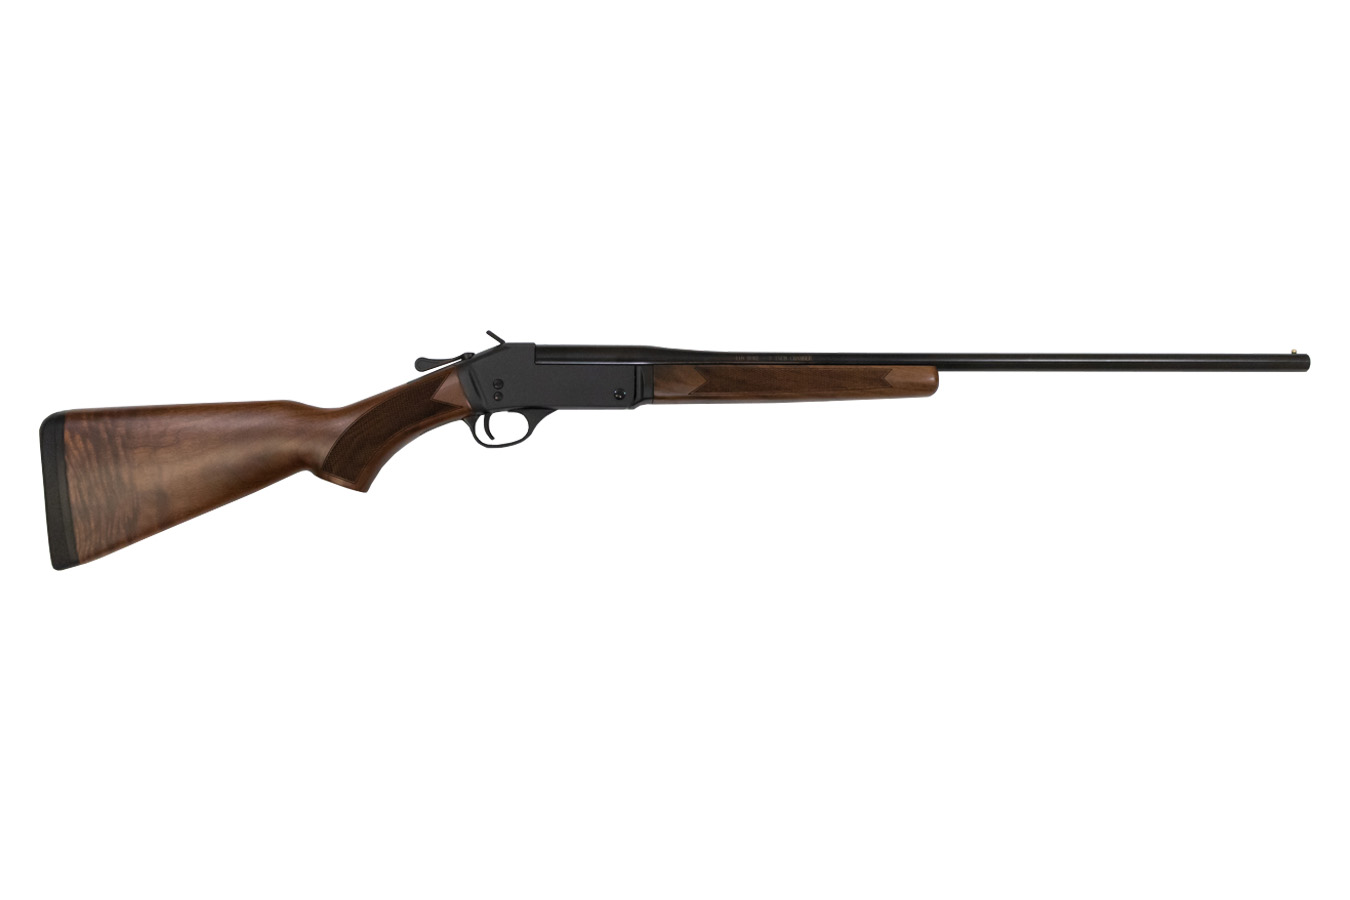 No. 18 Best Selling: HENRY REPEATING ARMS .410 BORE SINGLE-SHOT SHOTGUN